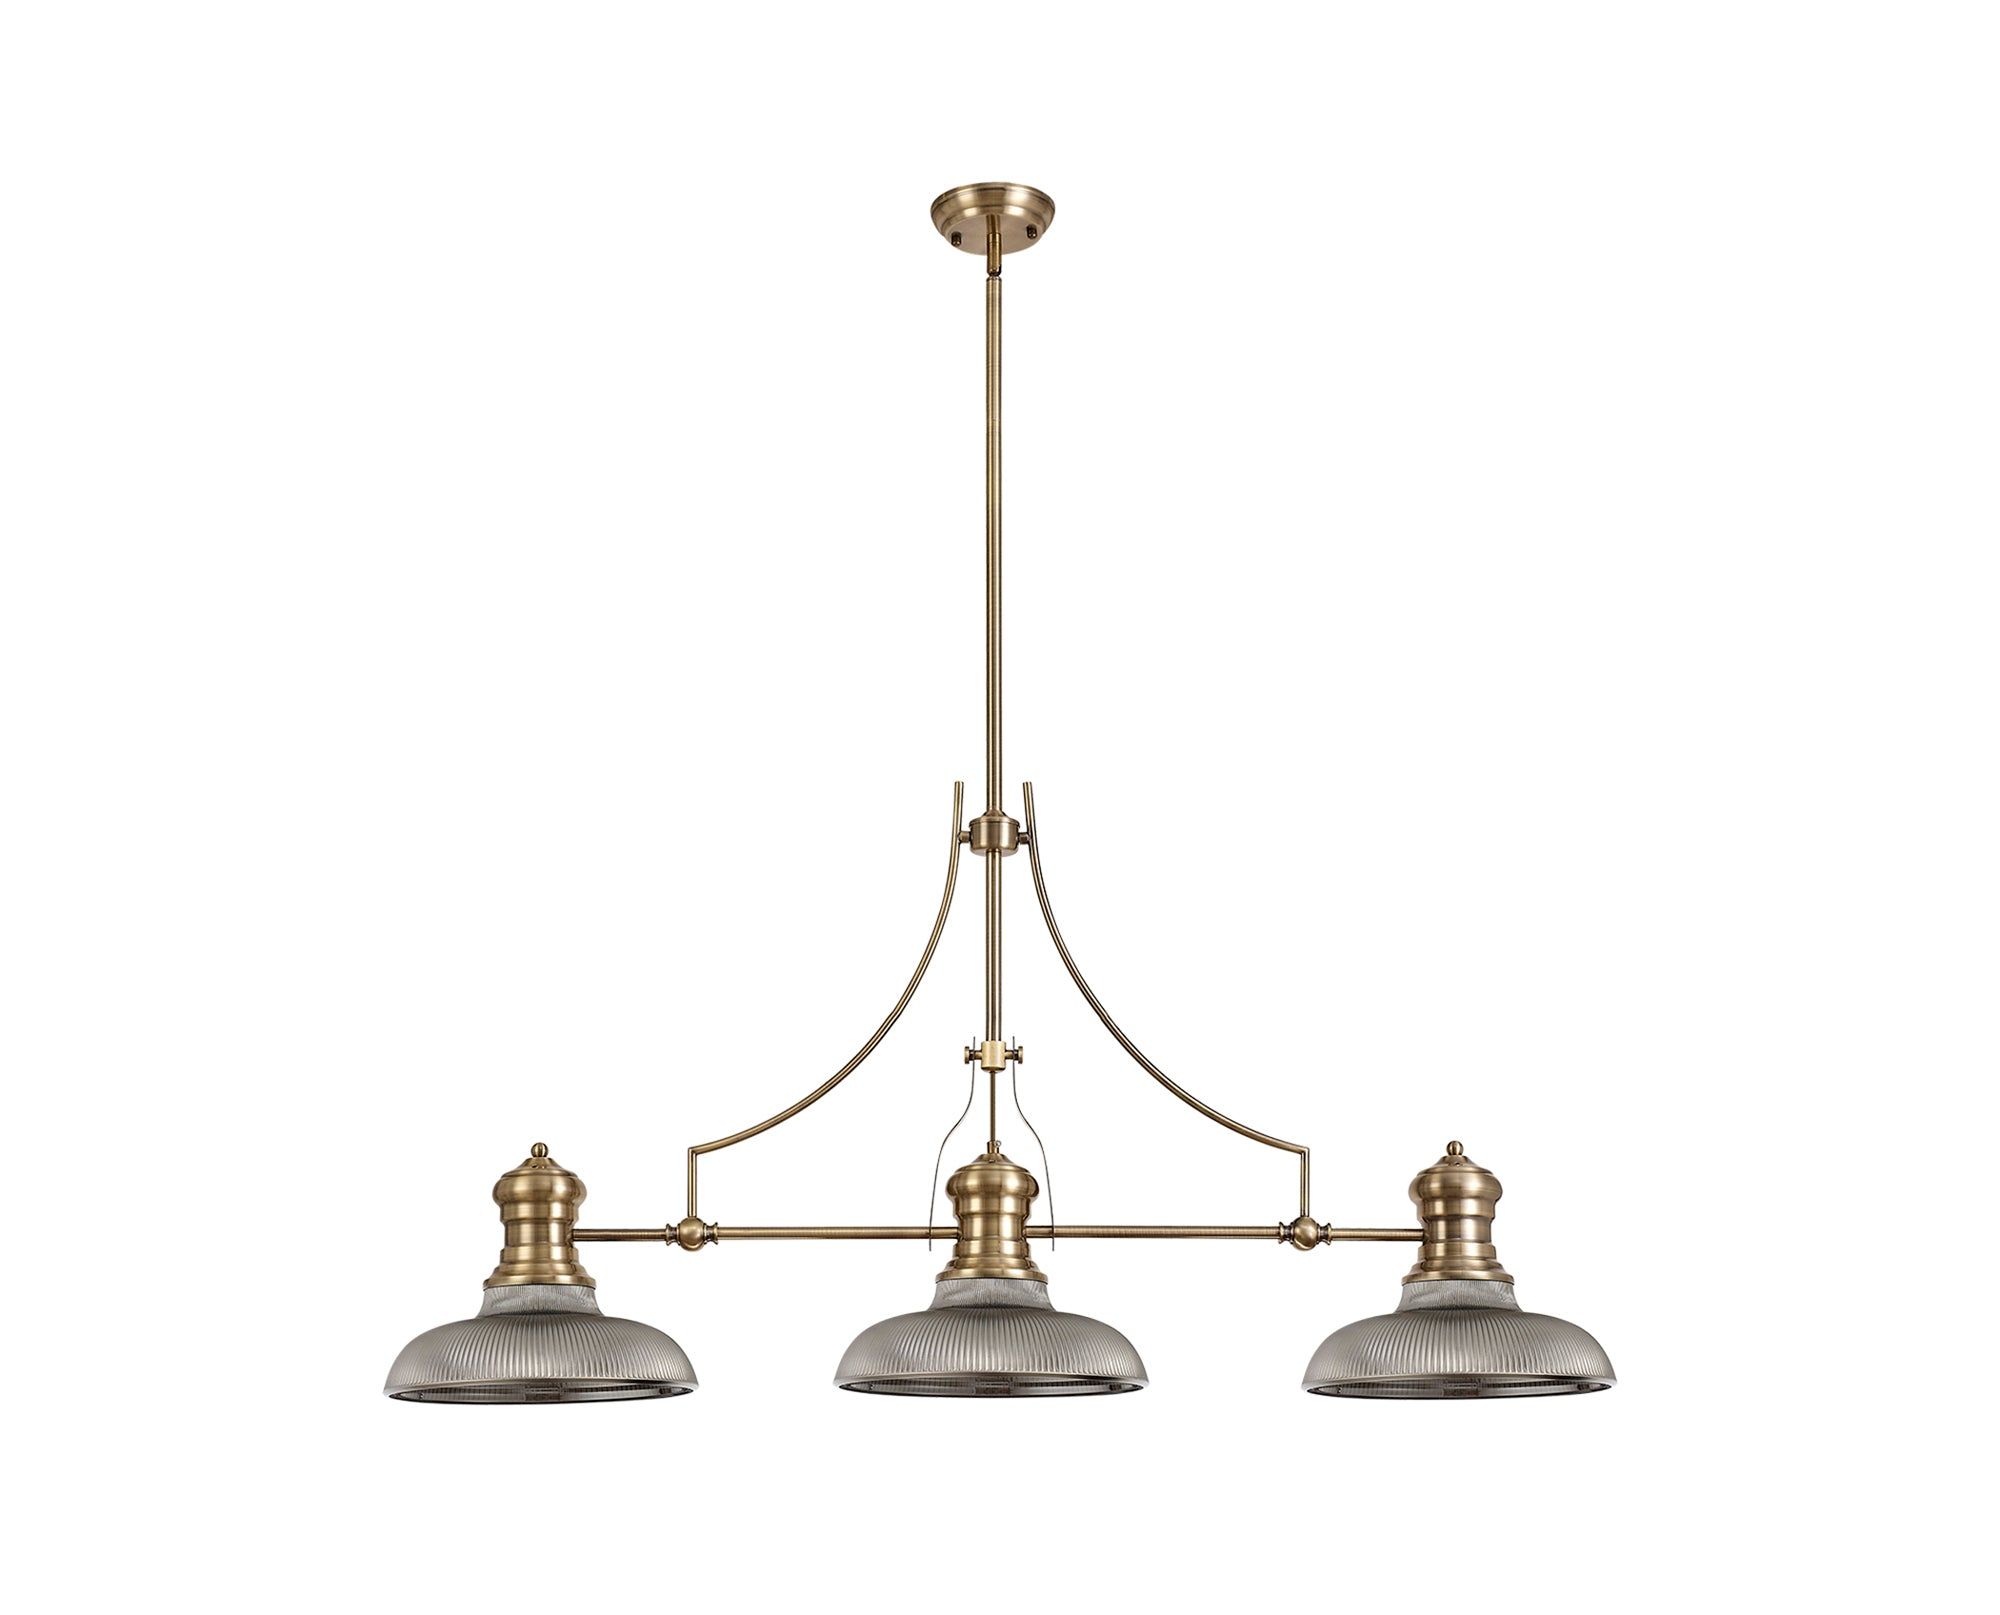 Savannah 3 Light Linear Pendant E27 With 30cm Round Glass Shade, Antique Brass, Smoked